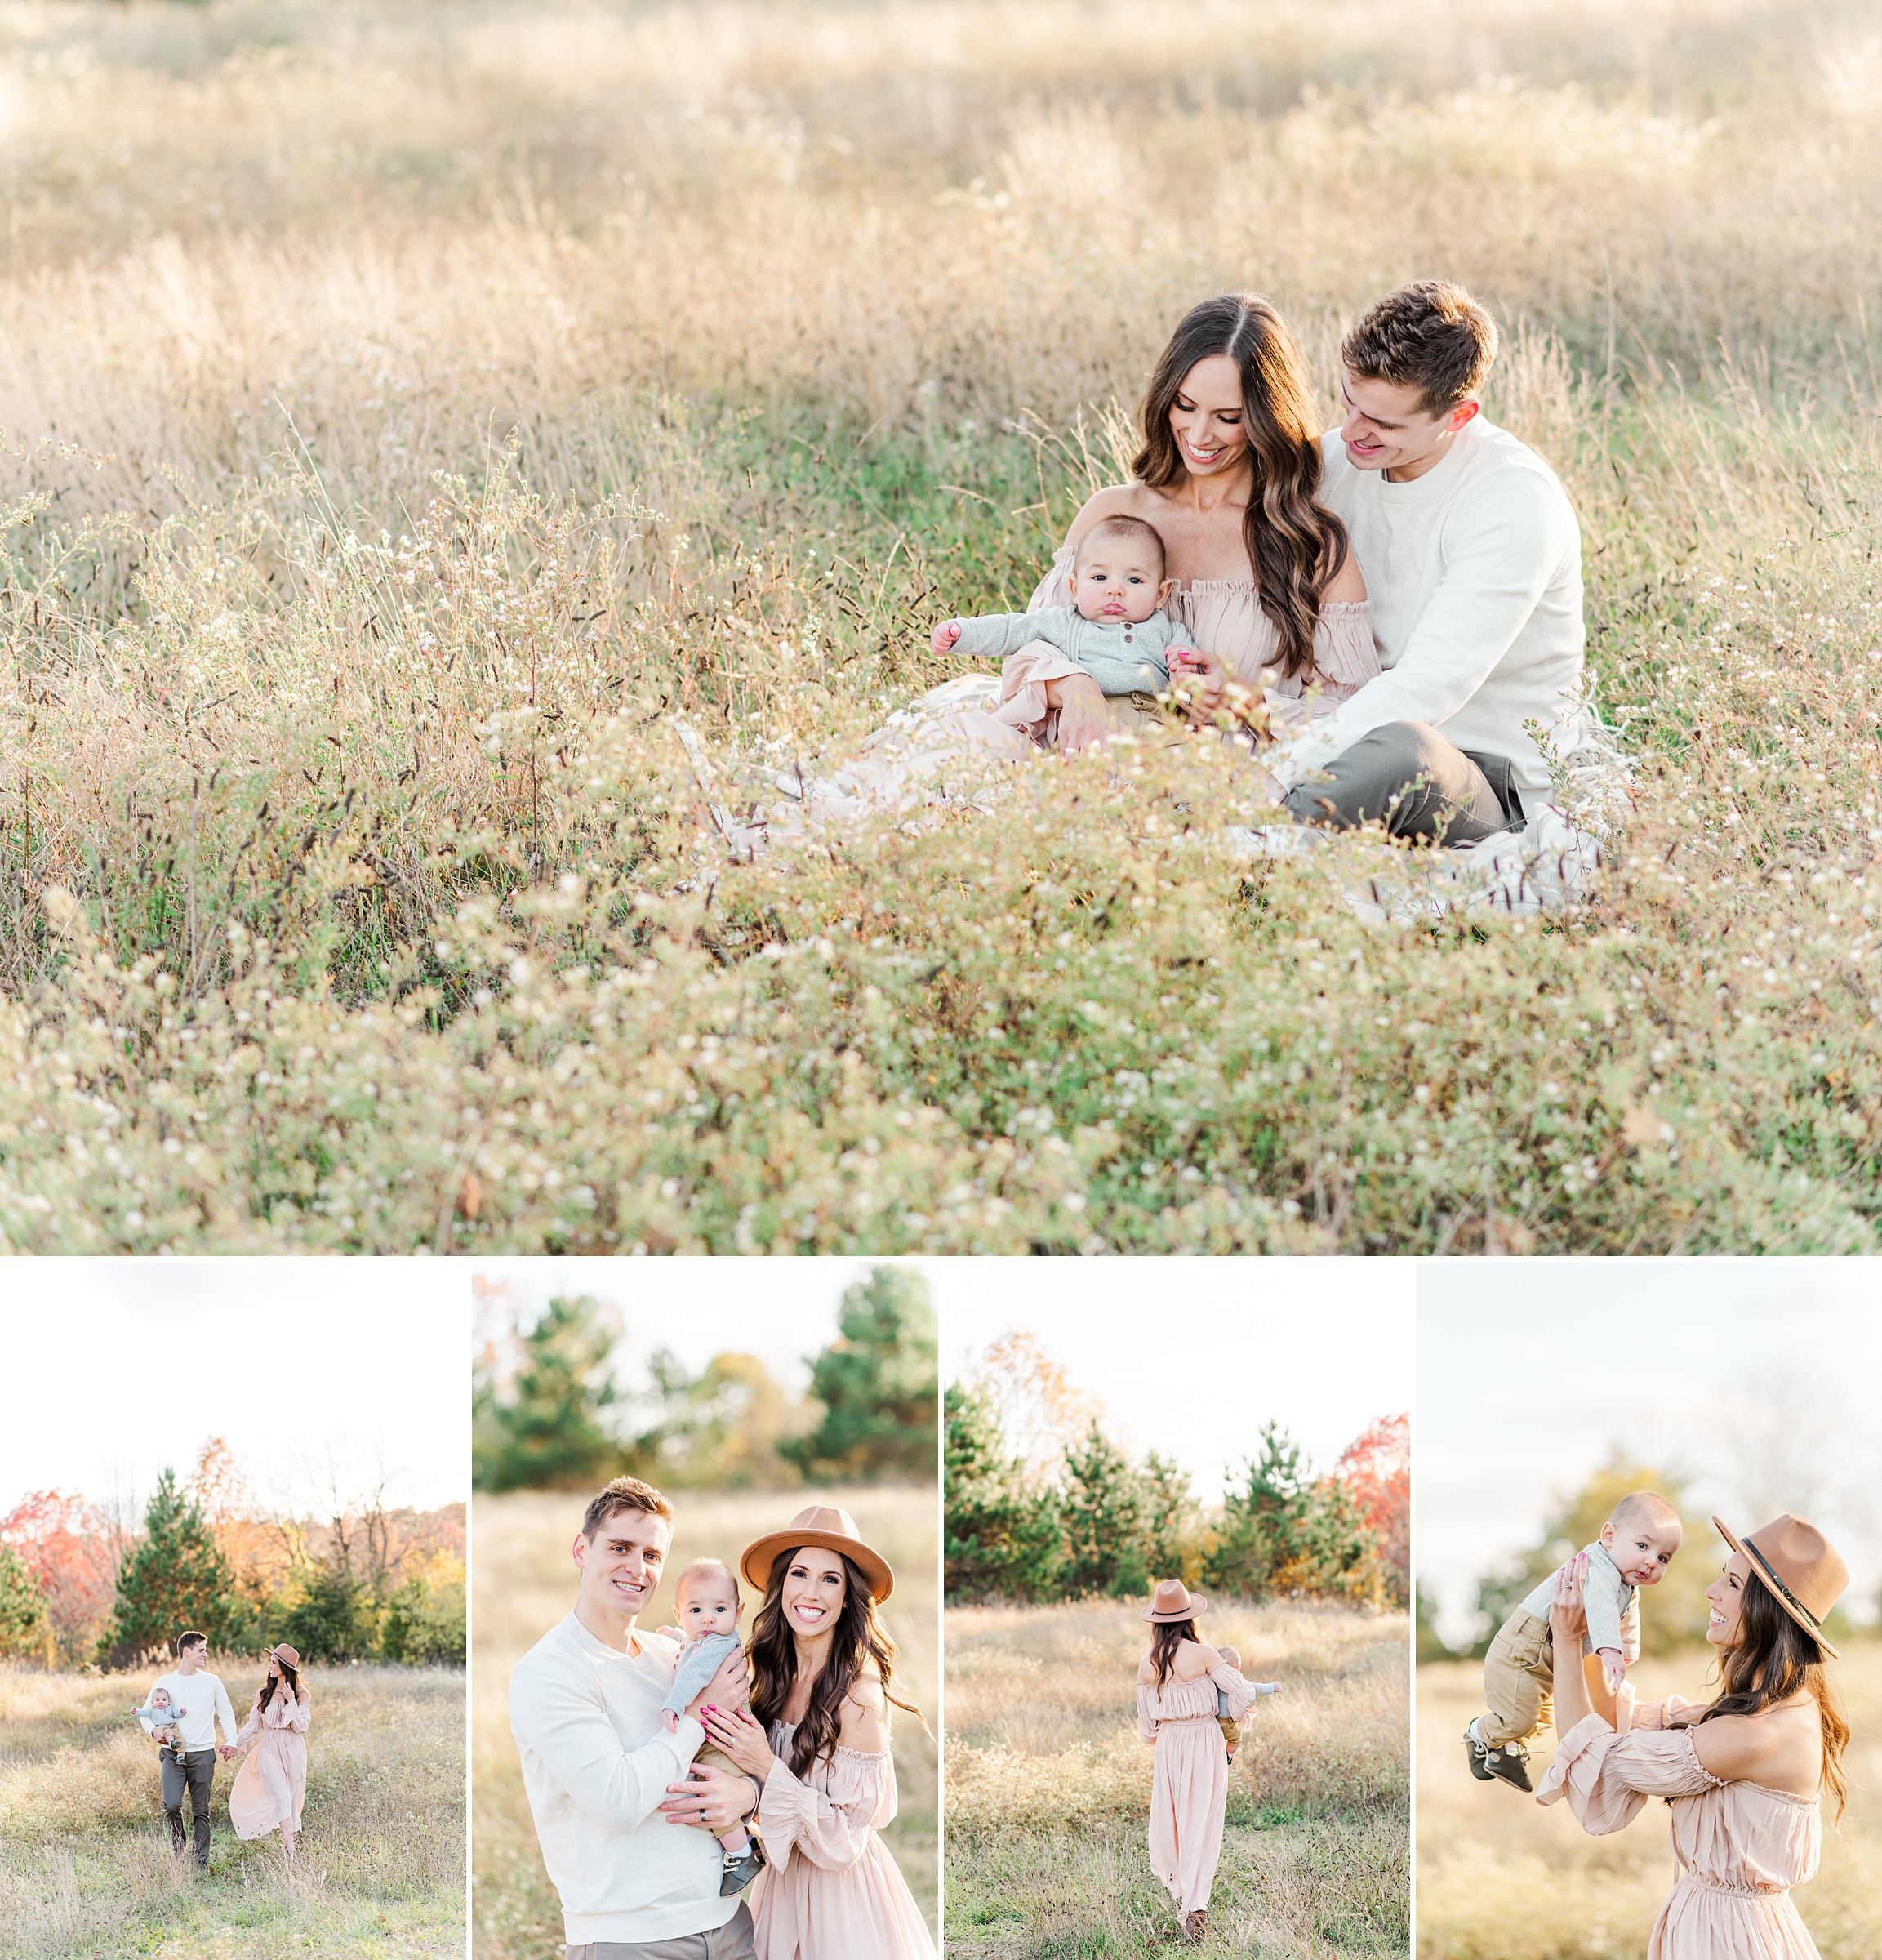 Family Photos in a Field at Sunset